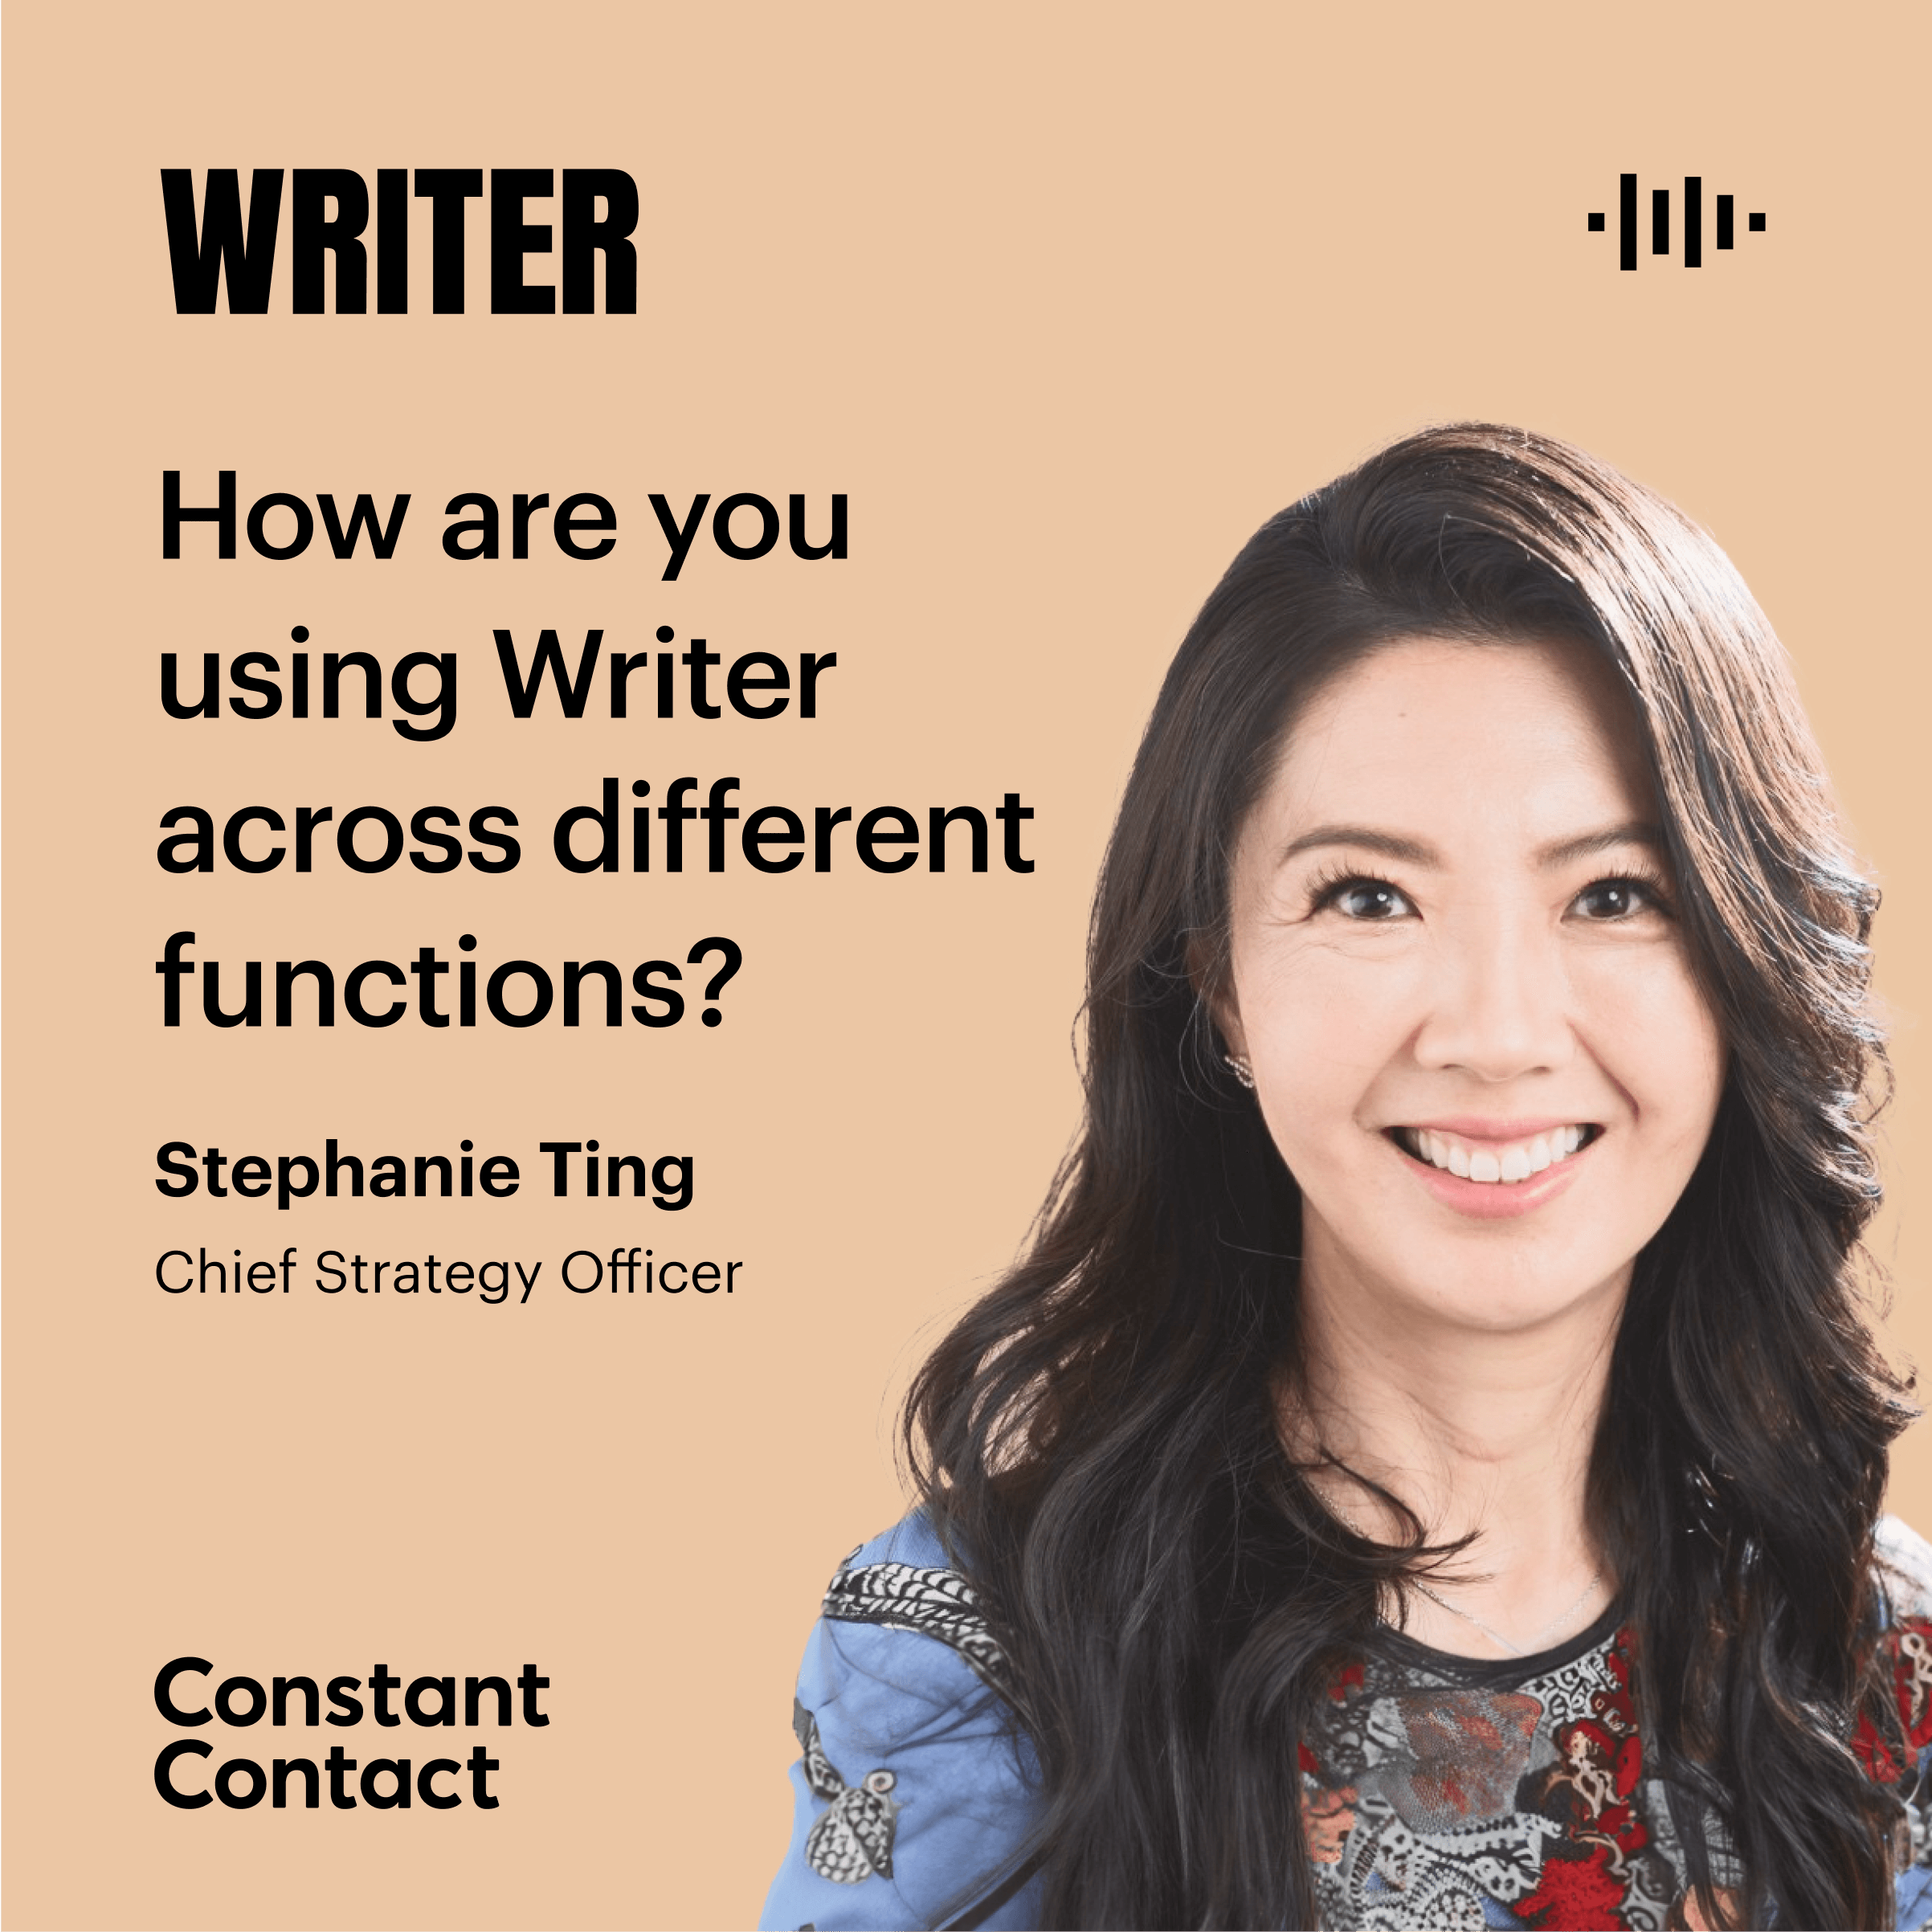 How are you using Writer across different functions?